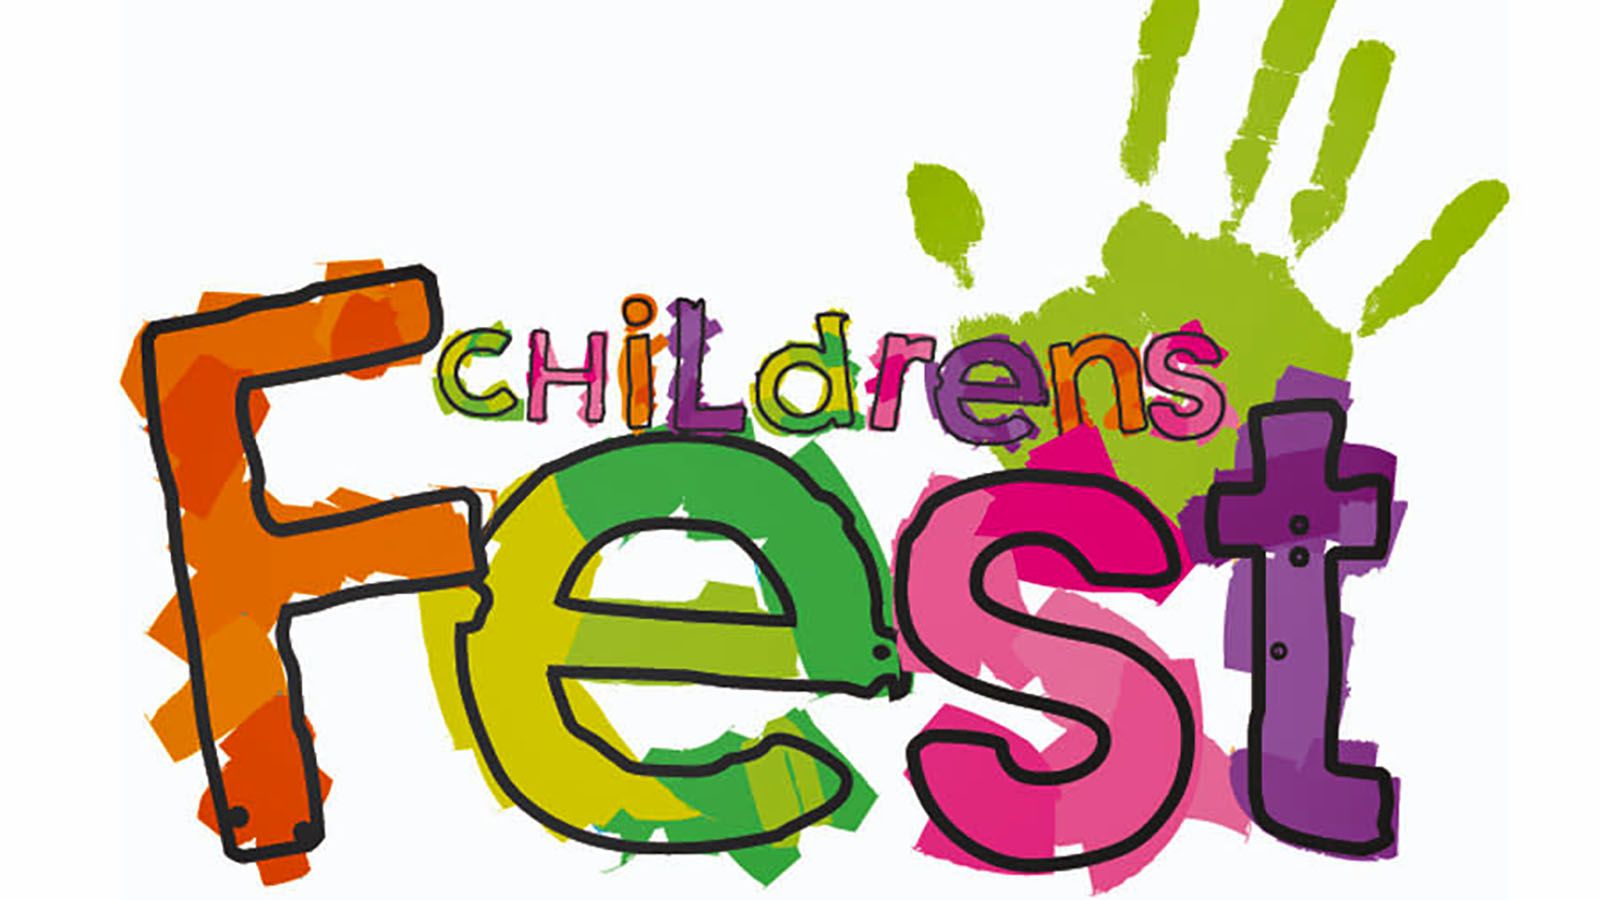 The Children's Fest will be held July 16 at Freimann Square.